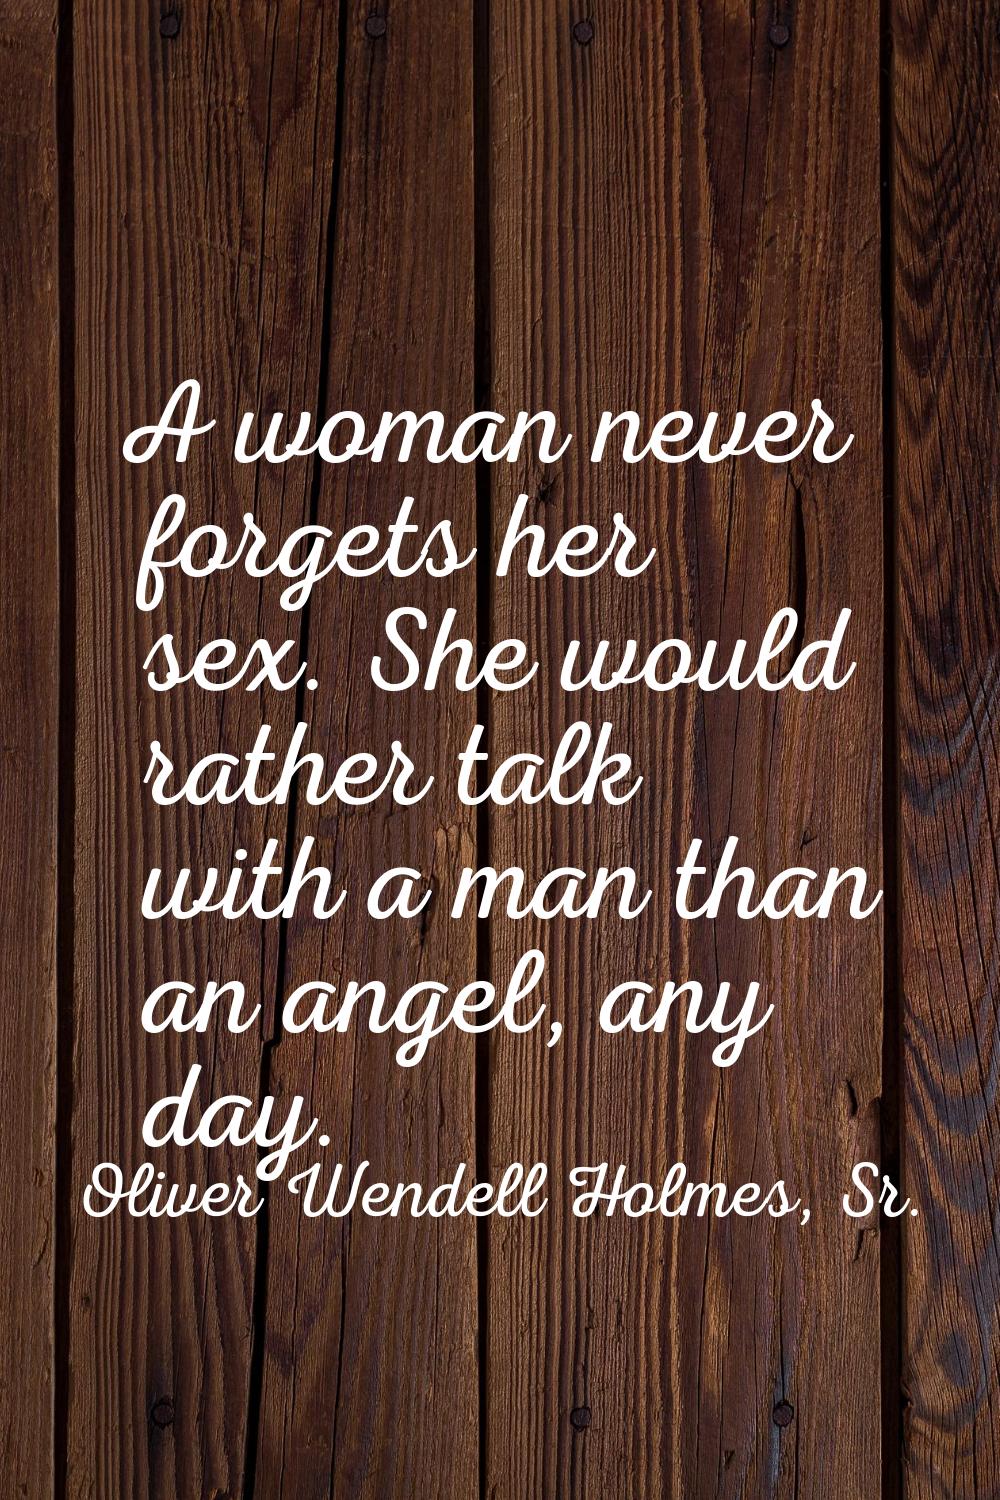 A woman never forgets her sex. She would rather talk with a man than an angel, any day.